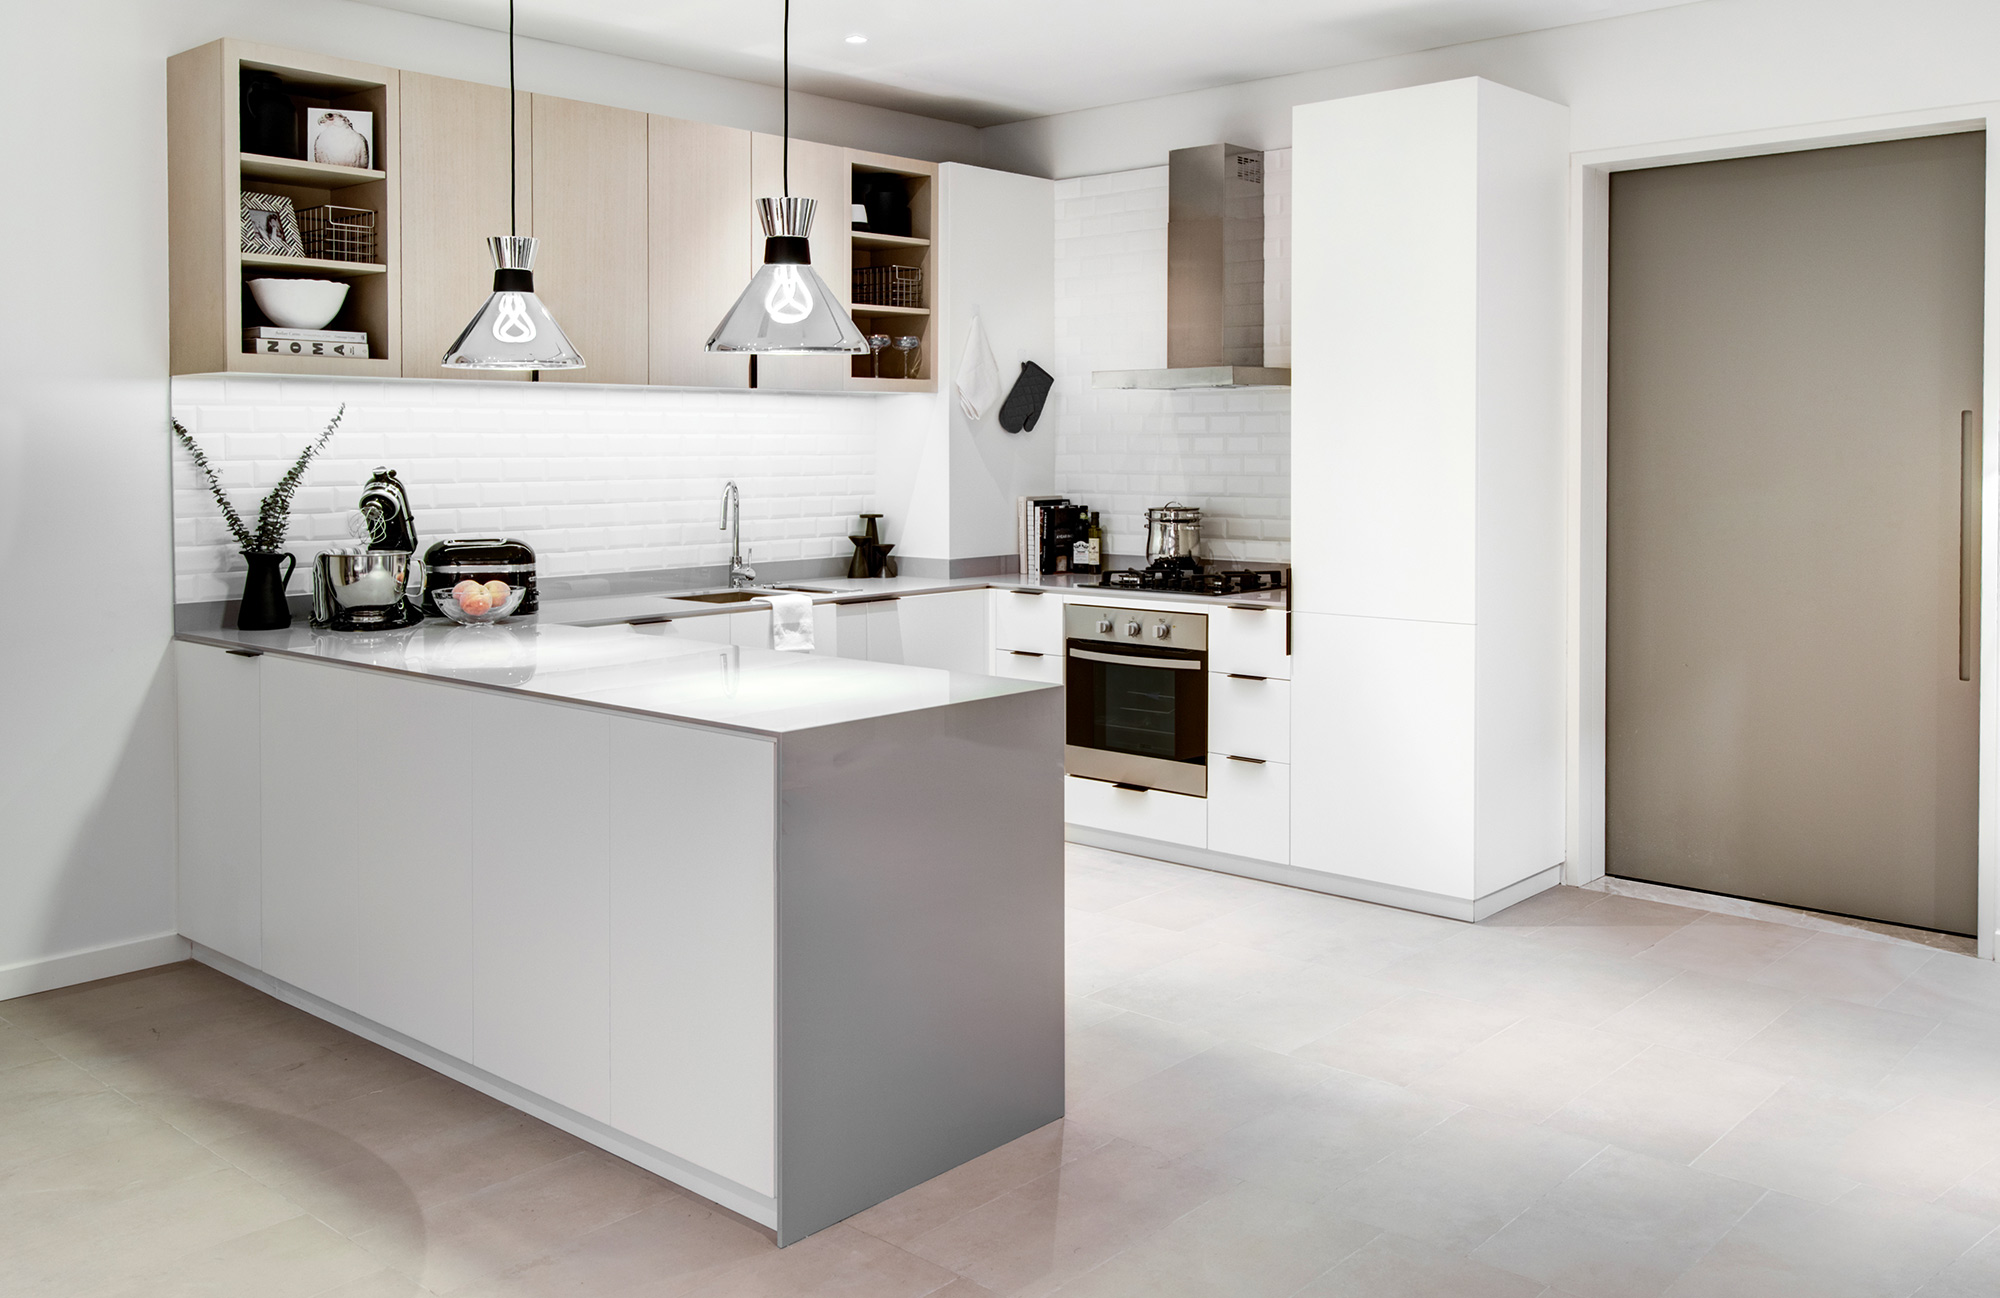 Image of Belgravia Heights I Show Apartment Kitchen in Dekton Kira is the star of the kitchen in this Madrid flat that redefines the concept of luxury - Cosentino